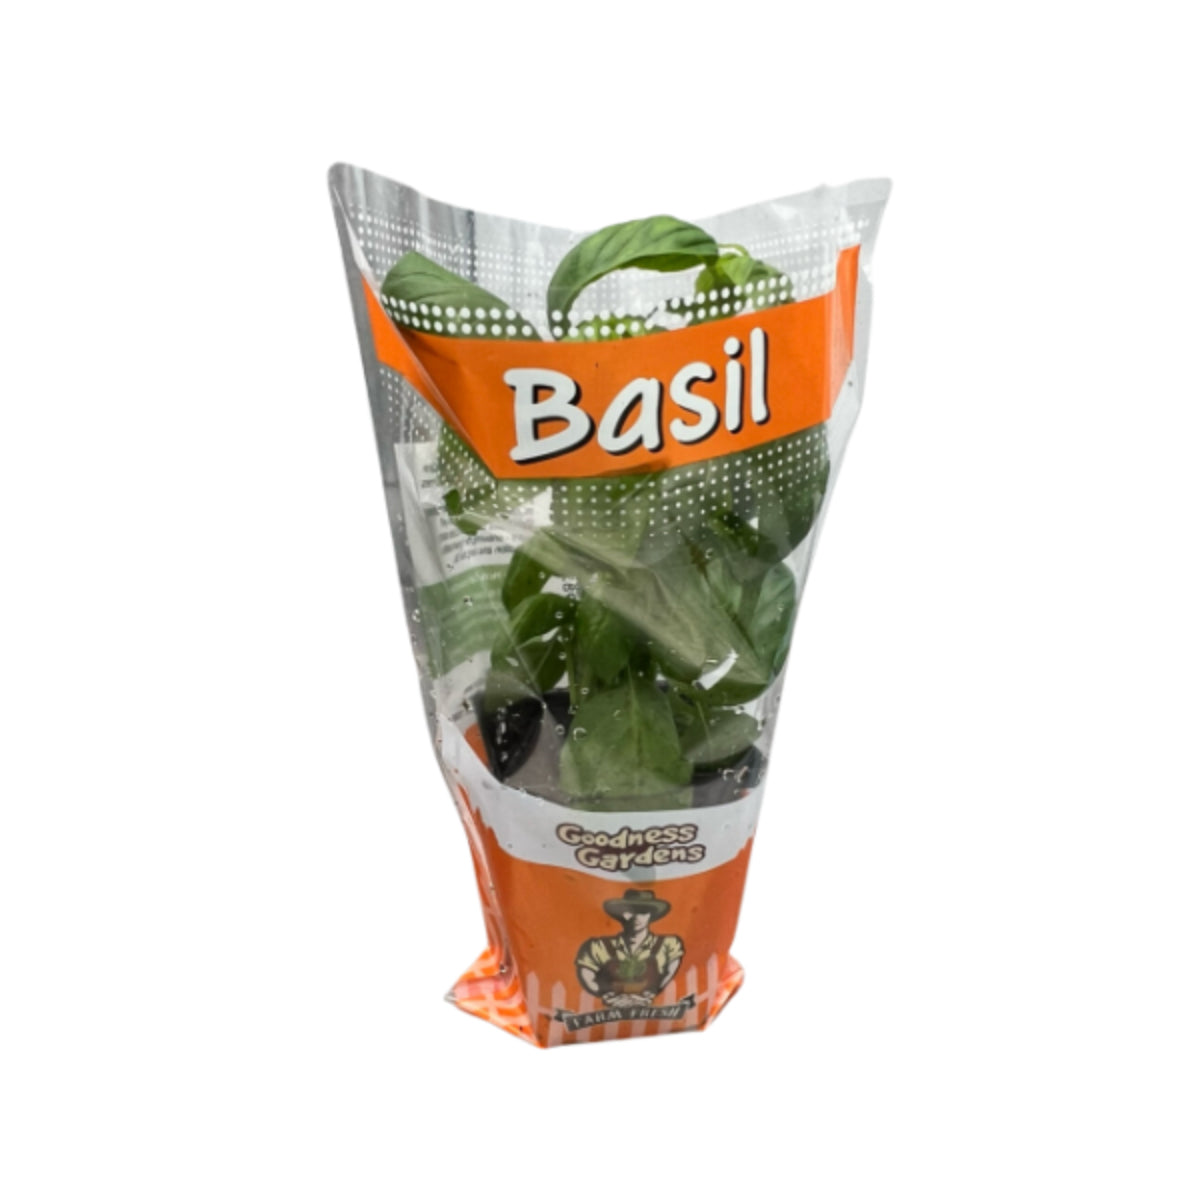 Goodness Gardens Potted Organic Basil 6 ct